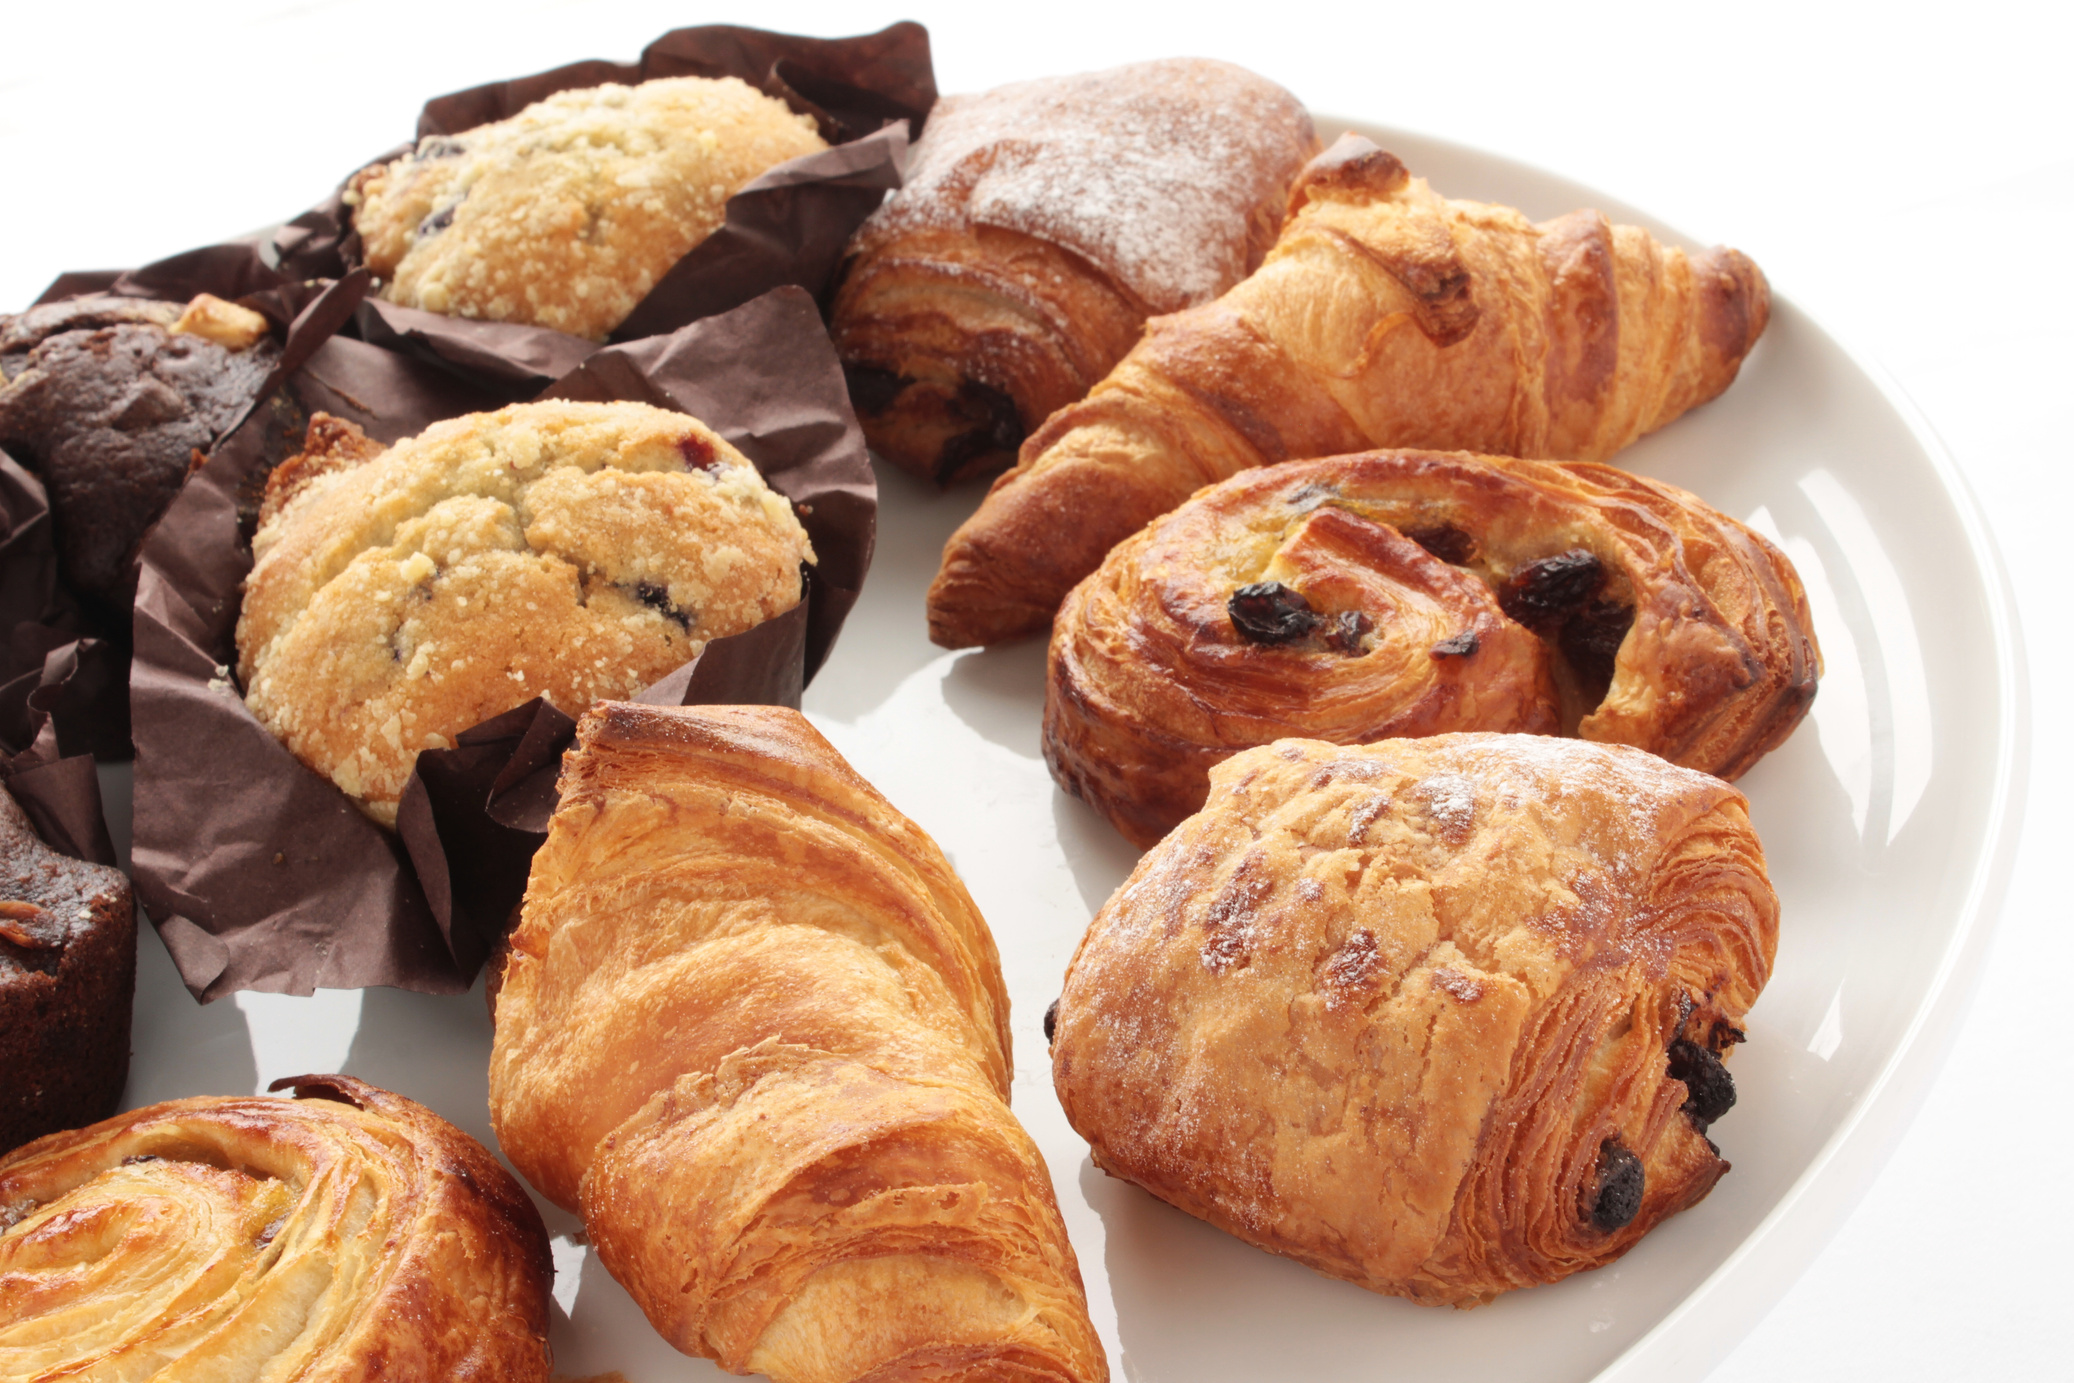 Pastries Selection